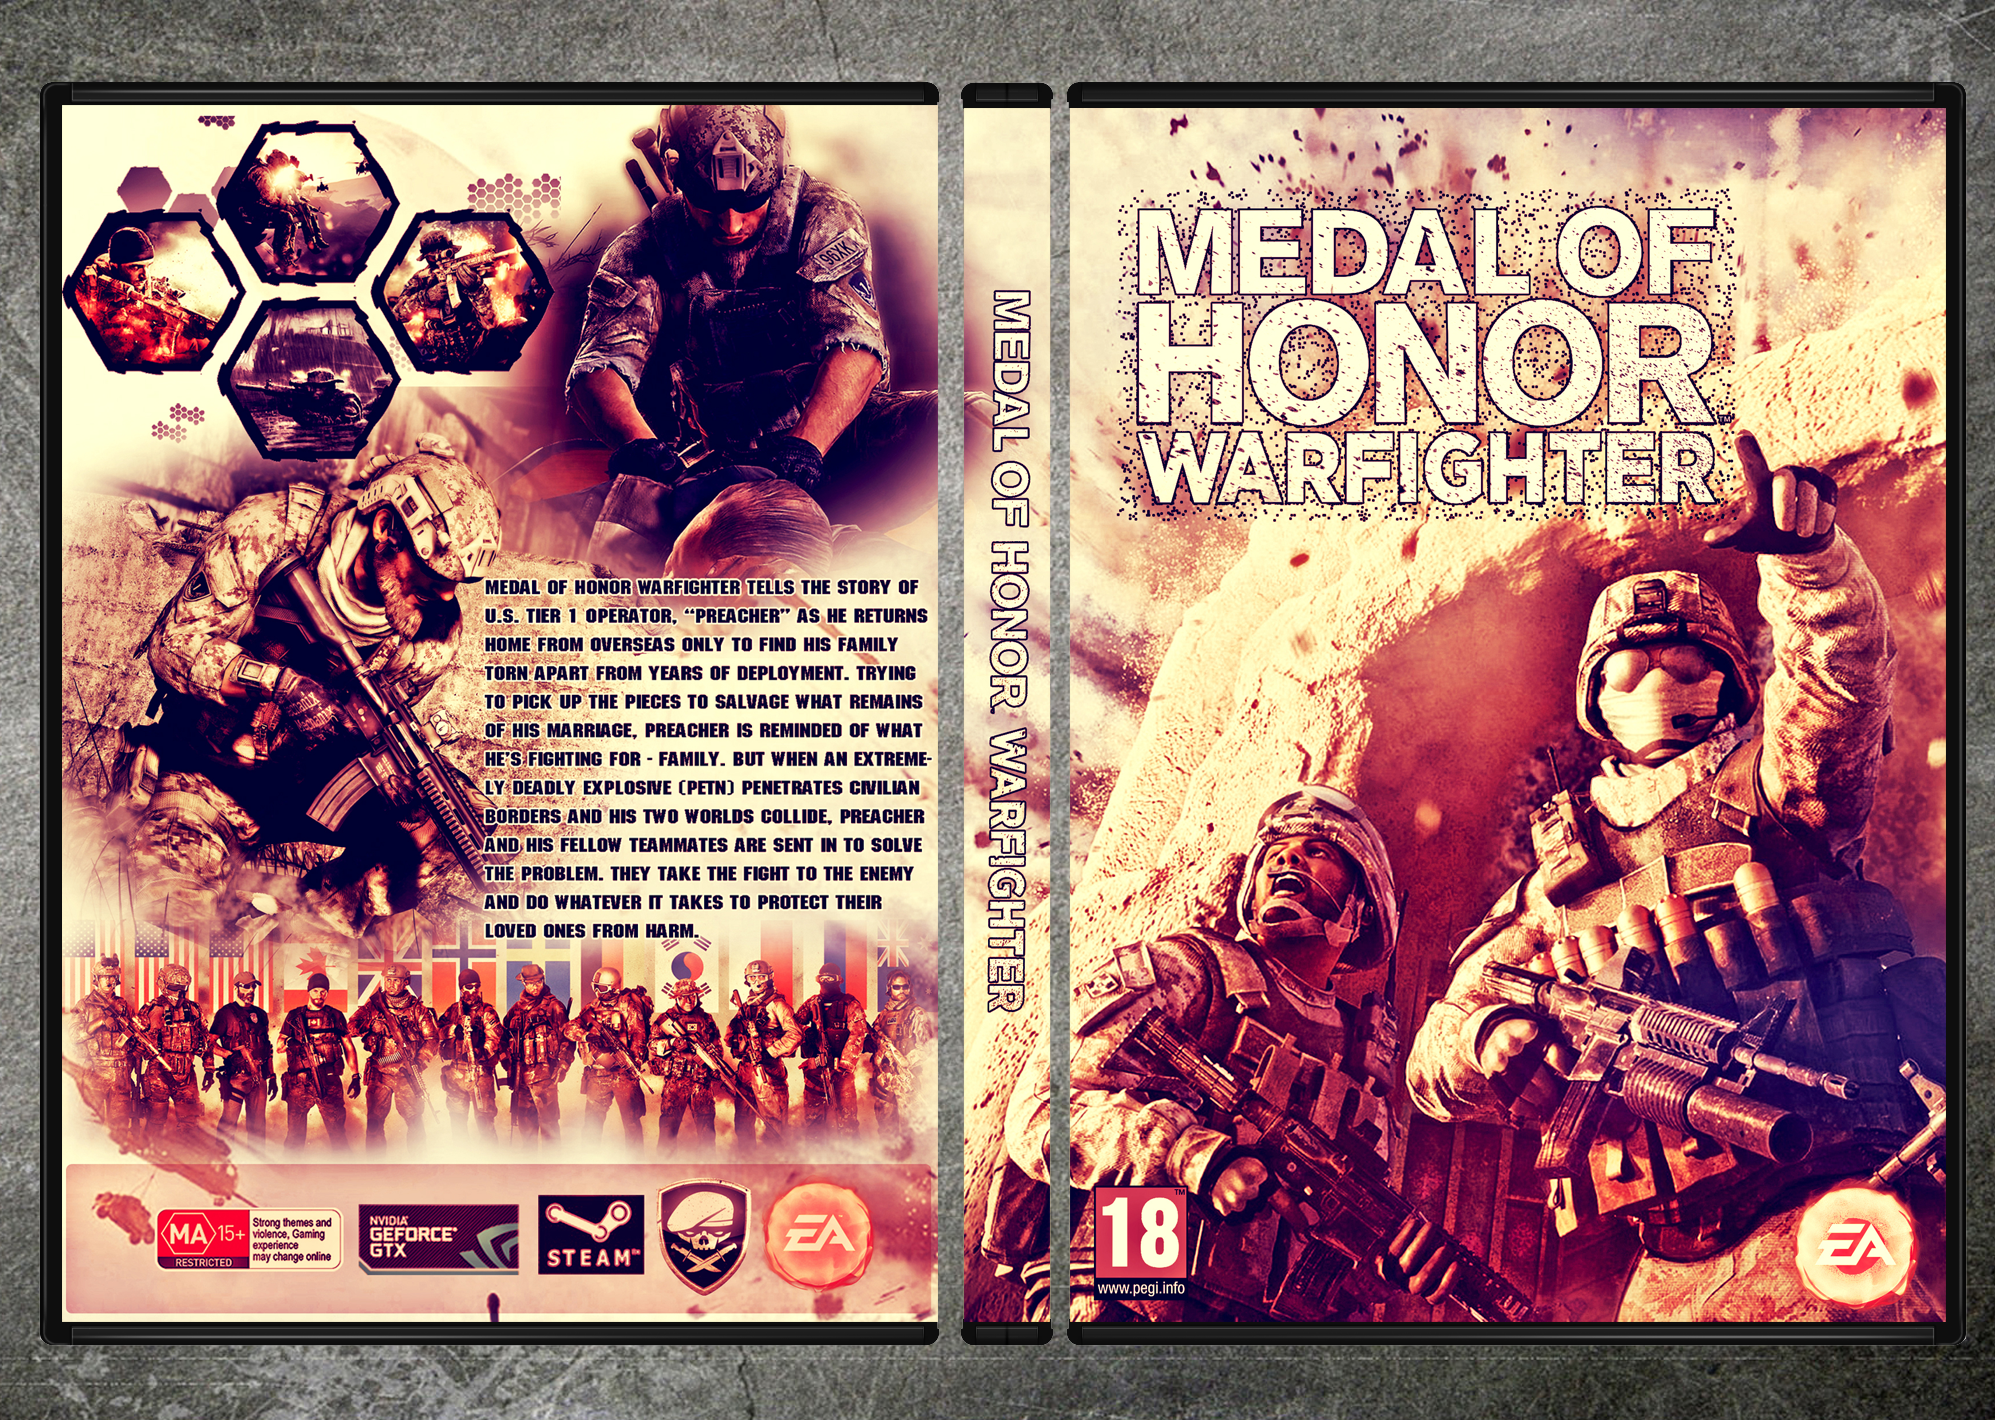 Medal of honor 360. Medal of Honor обложка. Плакат Medal of Honor диск. Причер медаль за отвагу. Medal of Honor: Warfighter PNG.